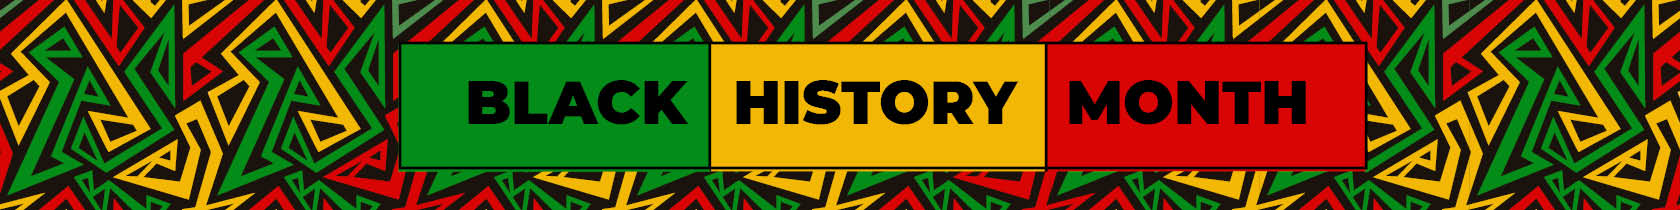 Black, red, yellow and green geometric shapes bordering the words "African American History"